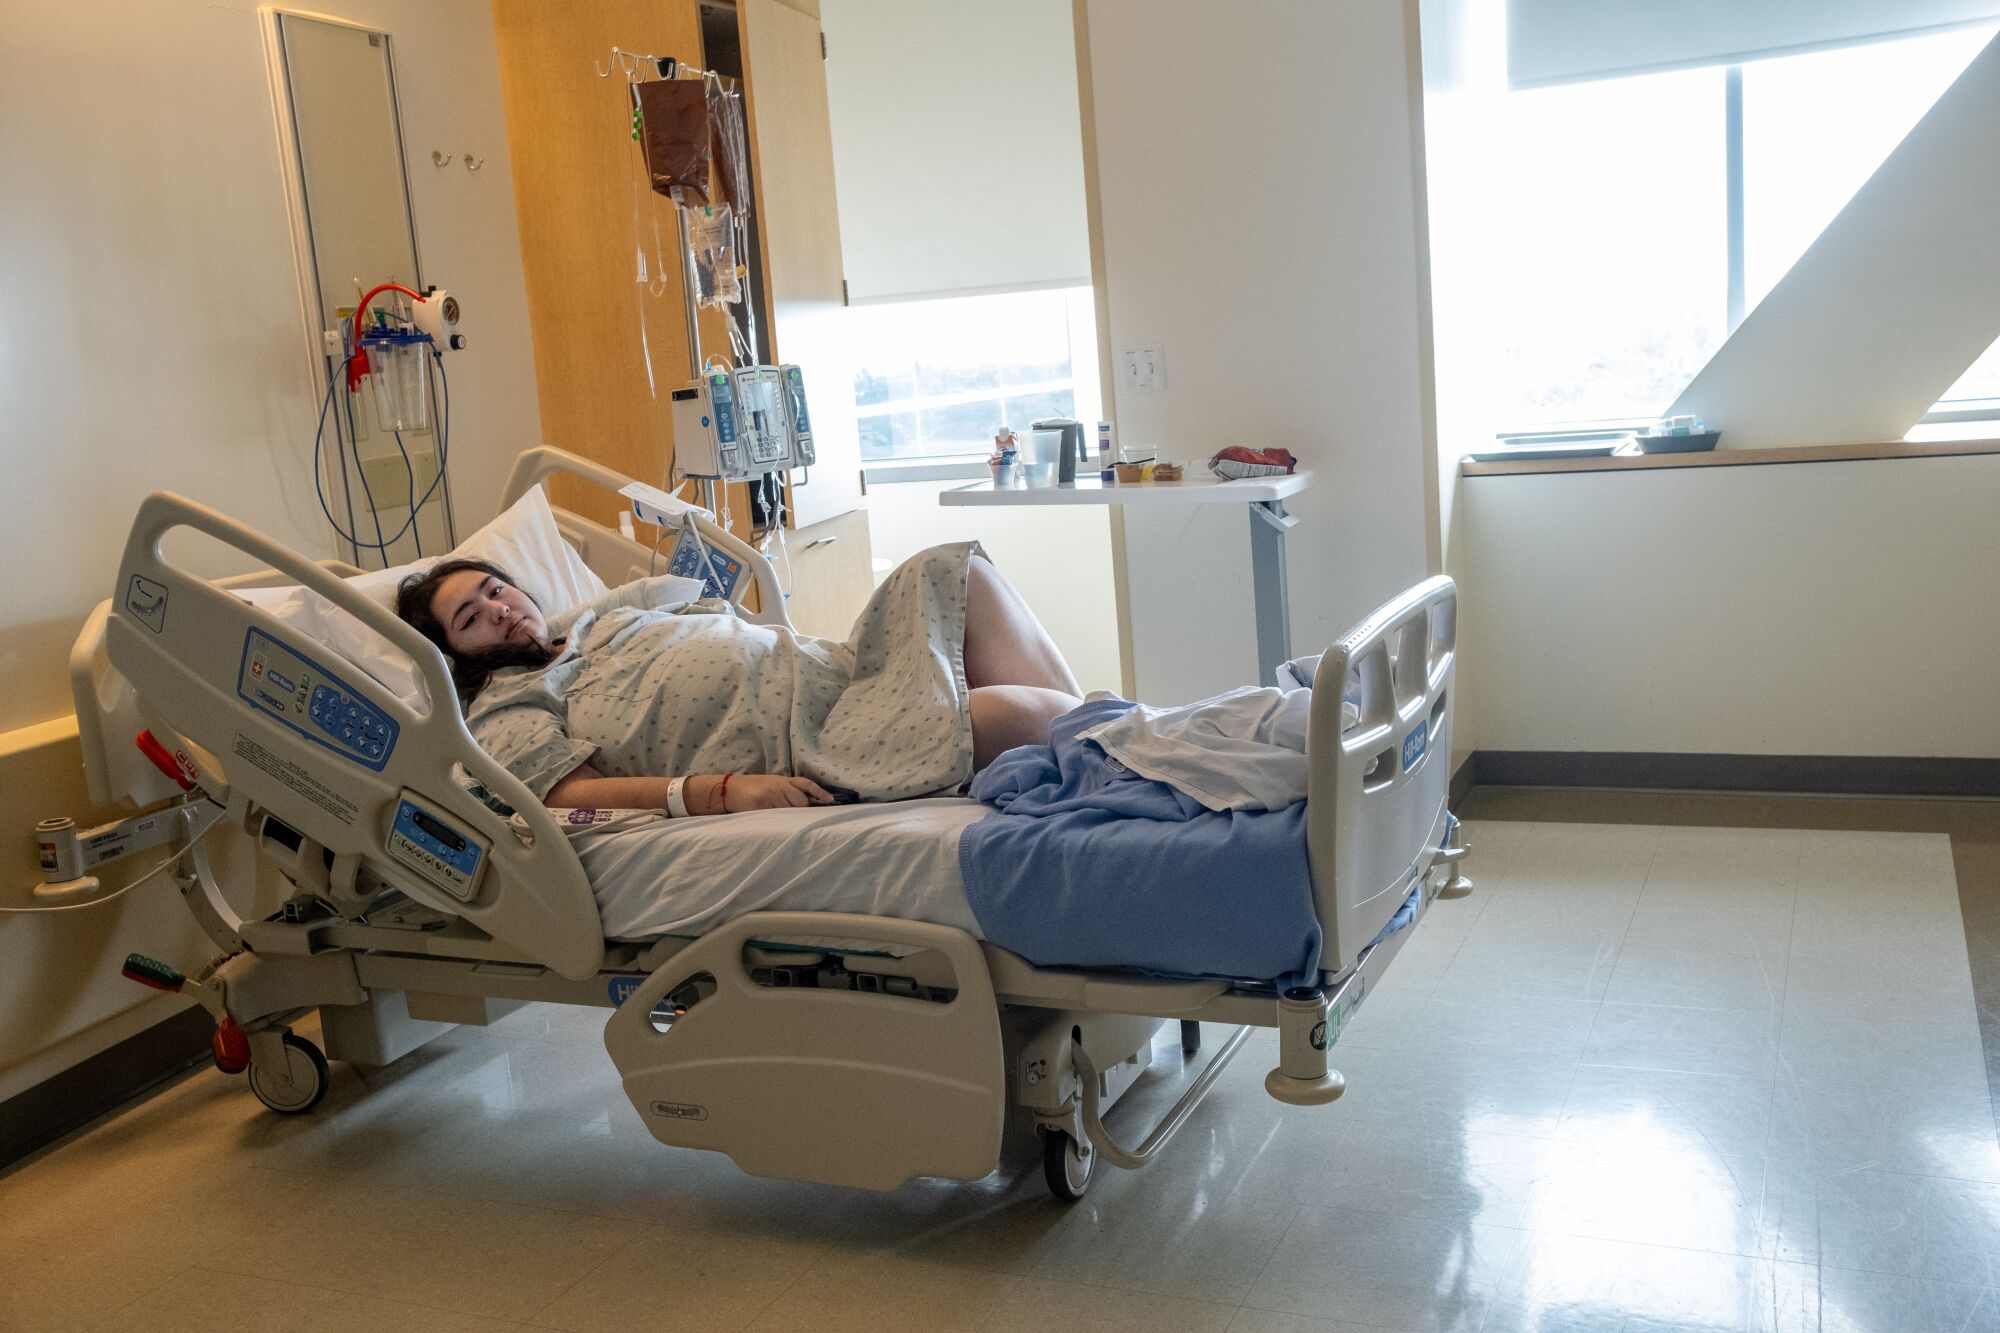 A woman reclined on a hospital bed